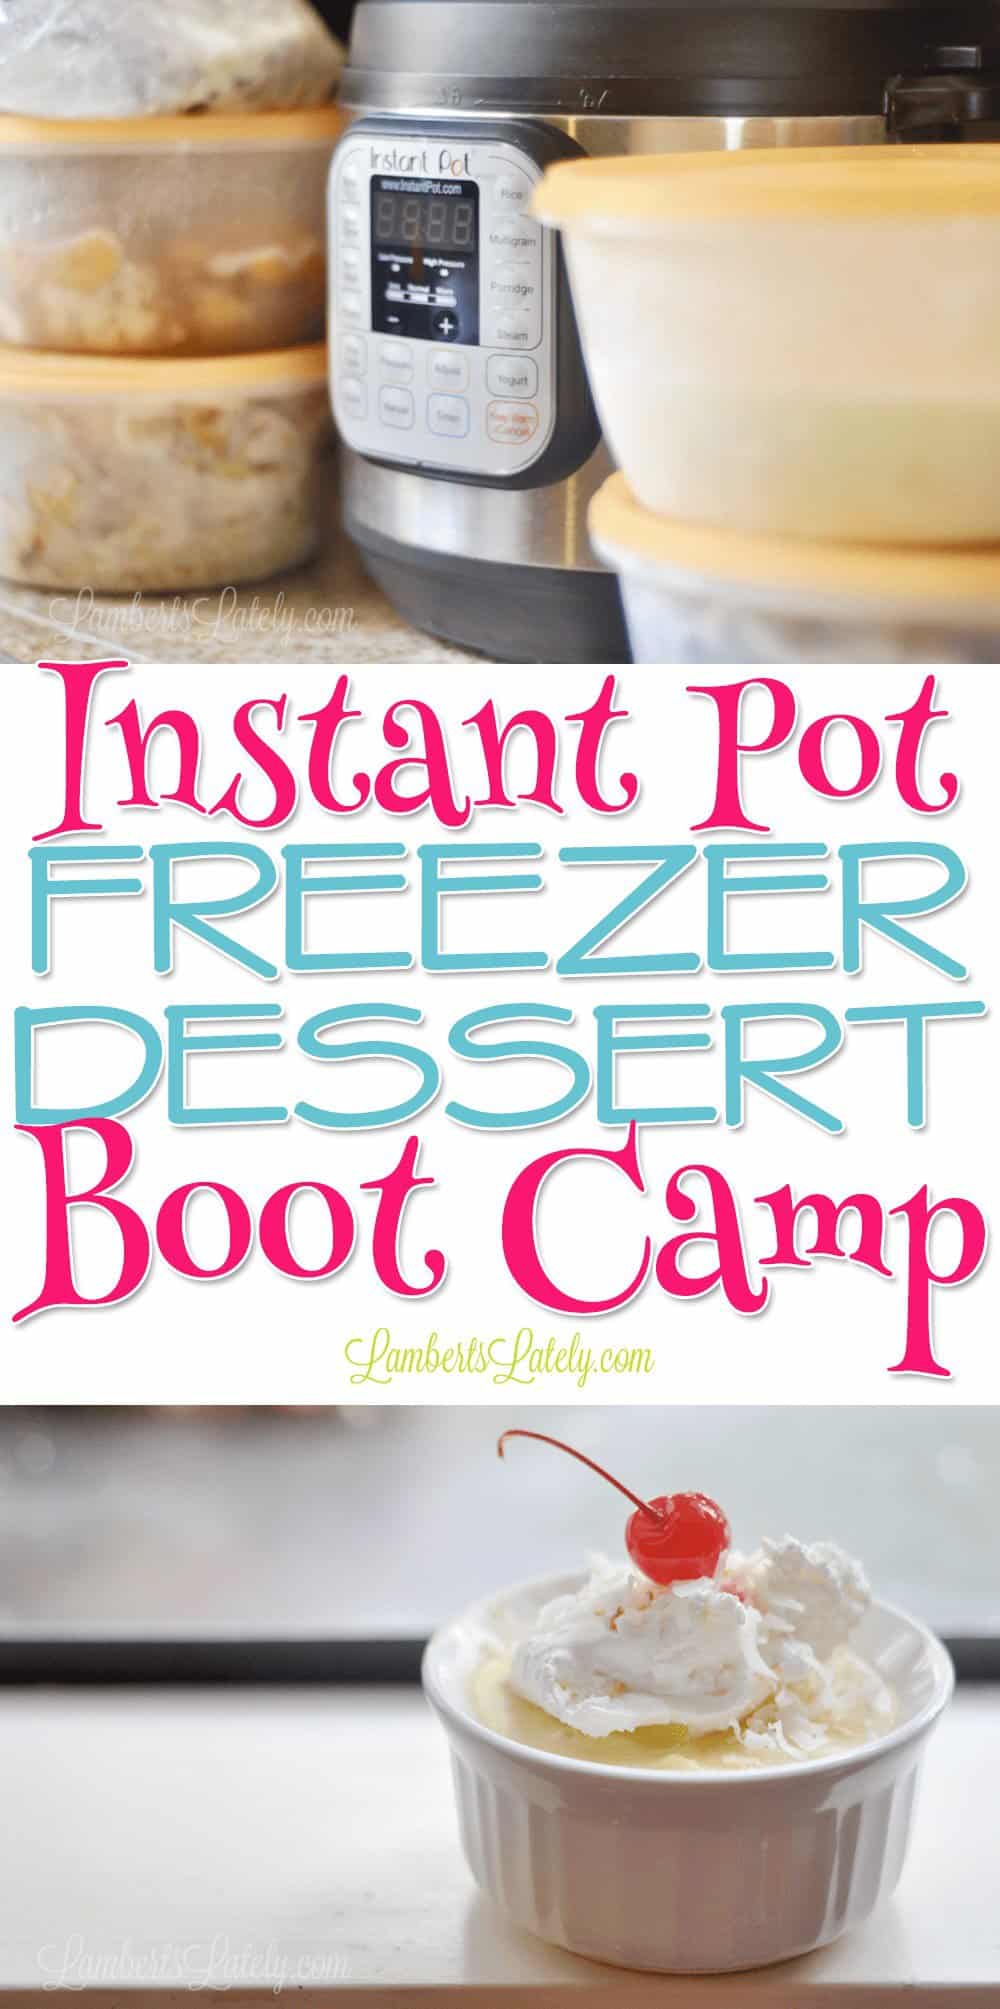 This Instant Pot Freezer Dessert Boot Camp has all you need to prep 5 desserts for the pressure cooker: printable recipe labels, a grocery list, and full prep instructions! These sweet recipes are so easy and delicious. Great time saver!